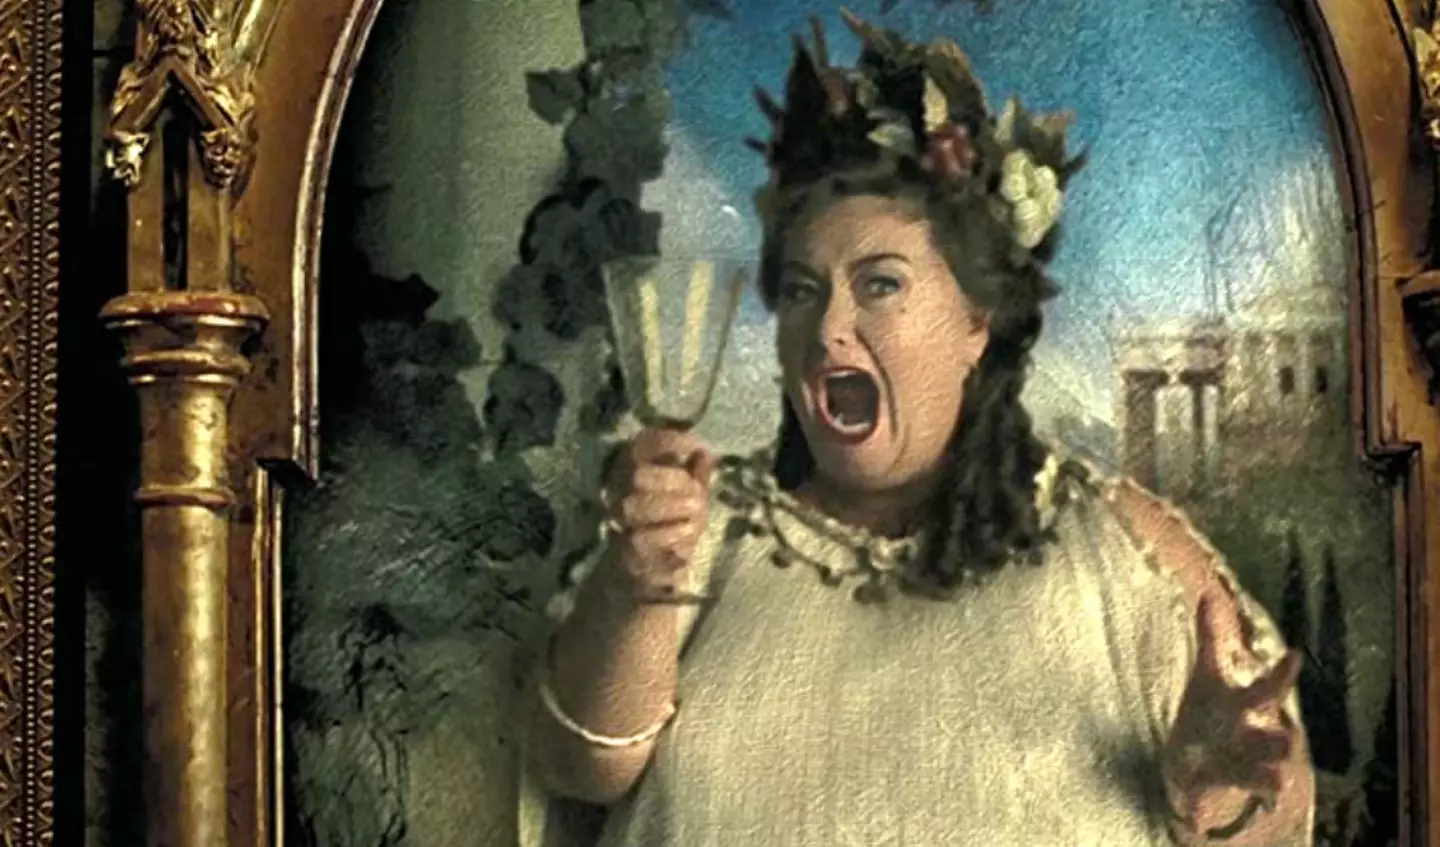 Dawn French took over as the Fat Lady.